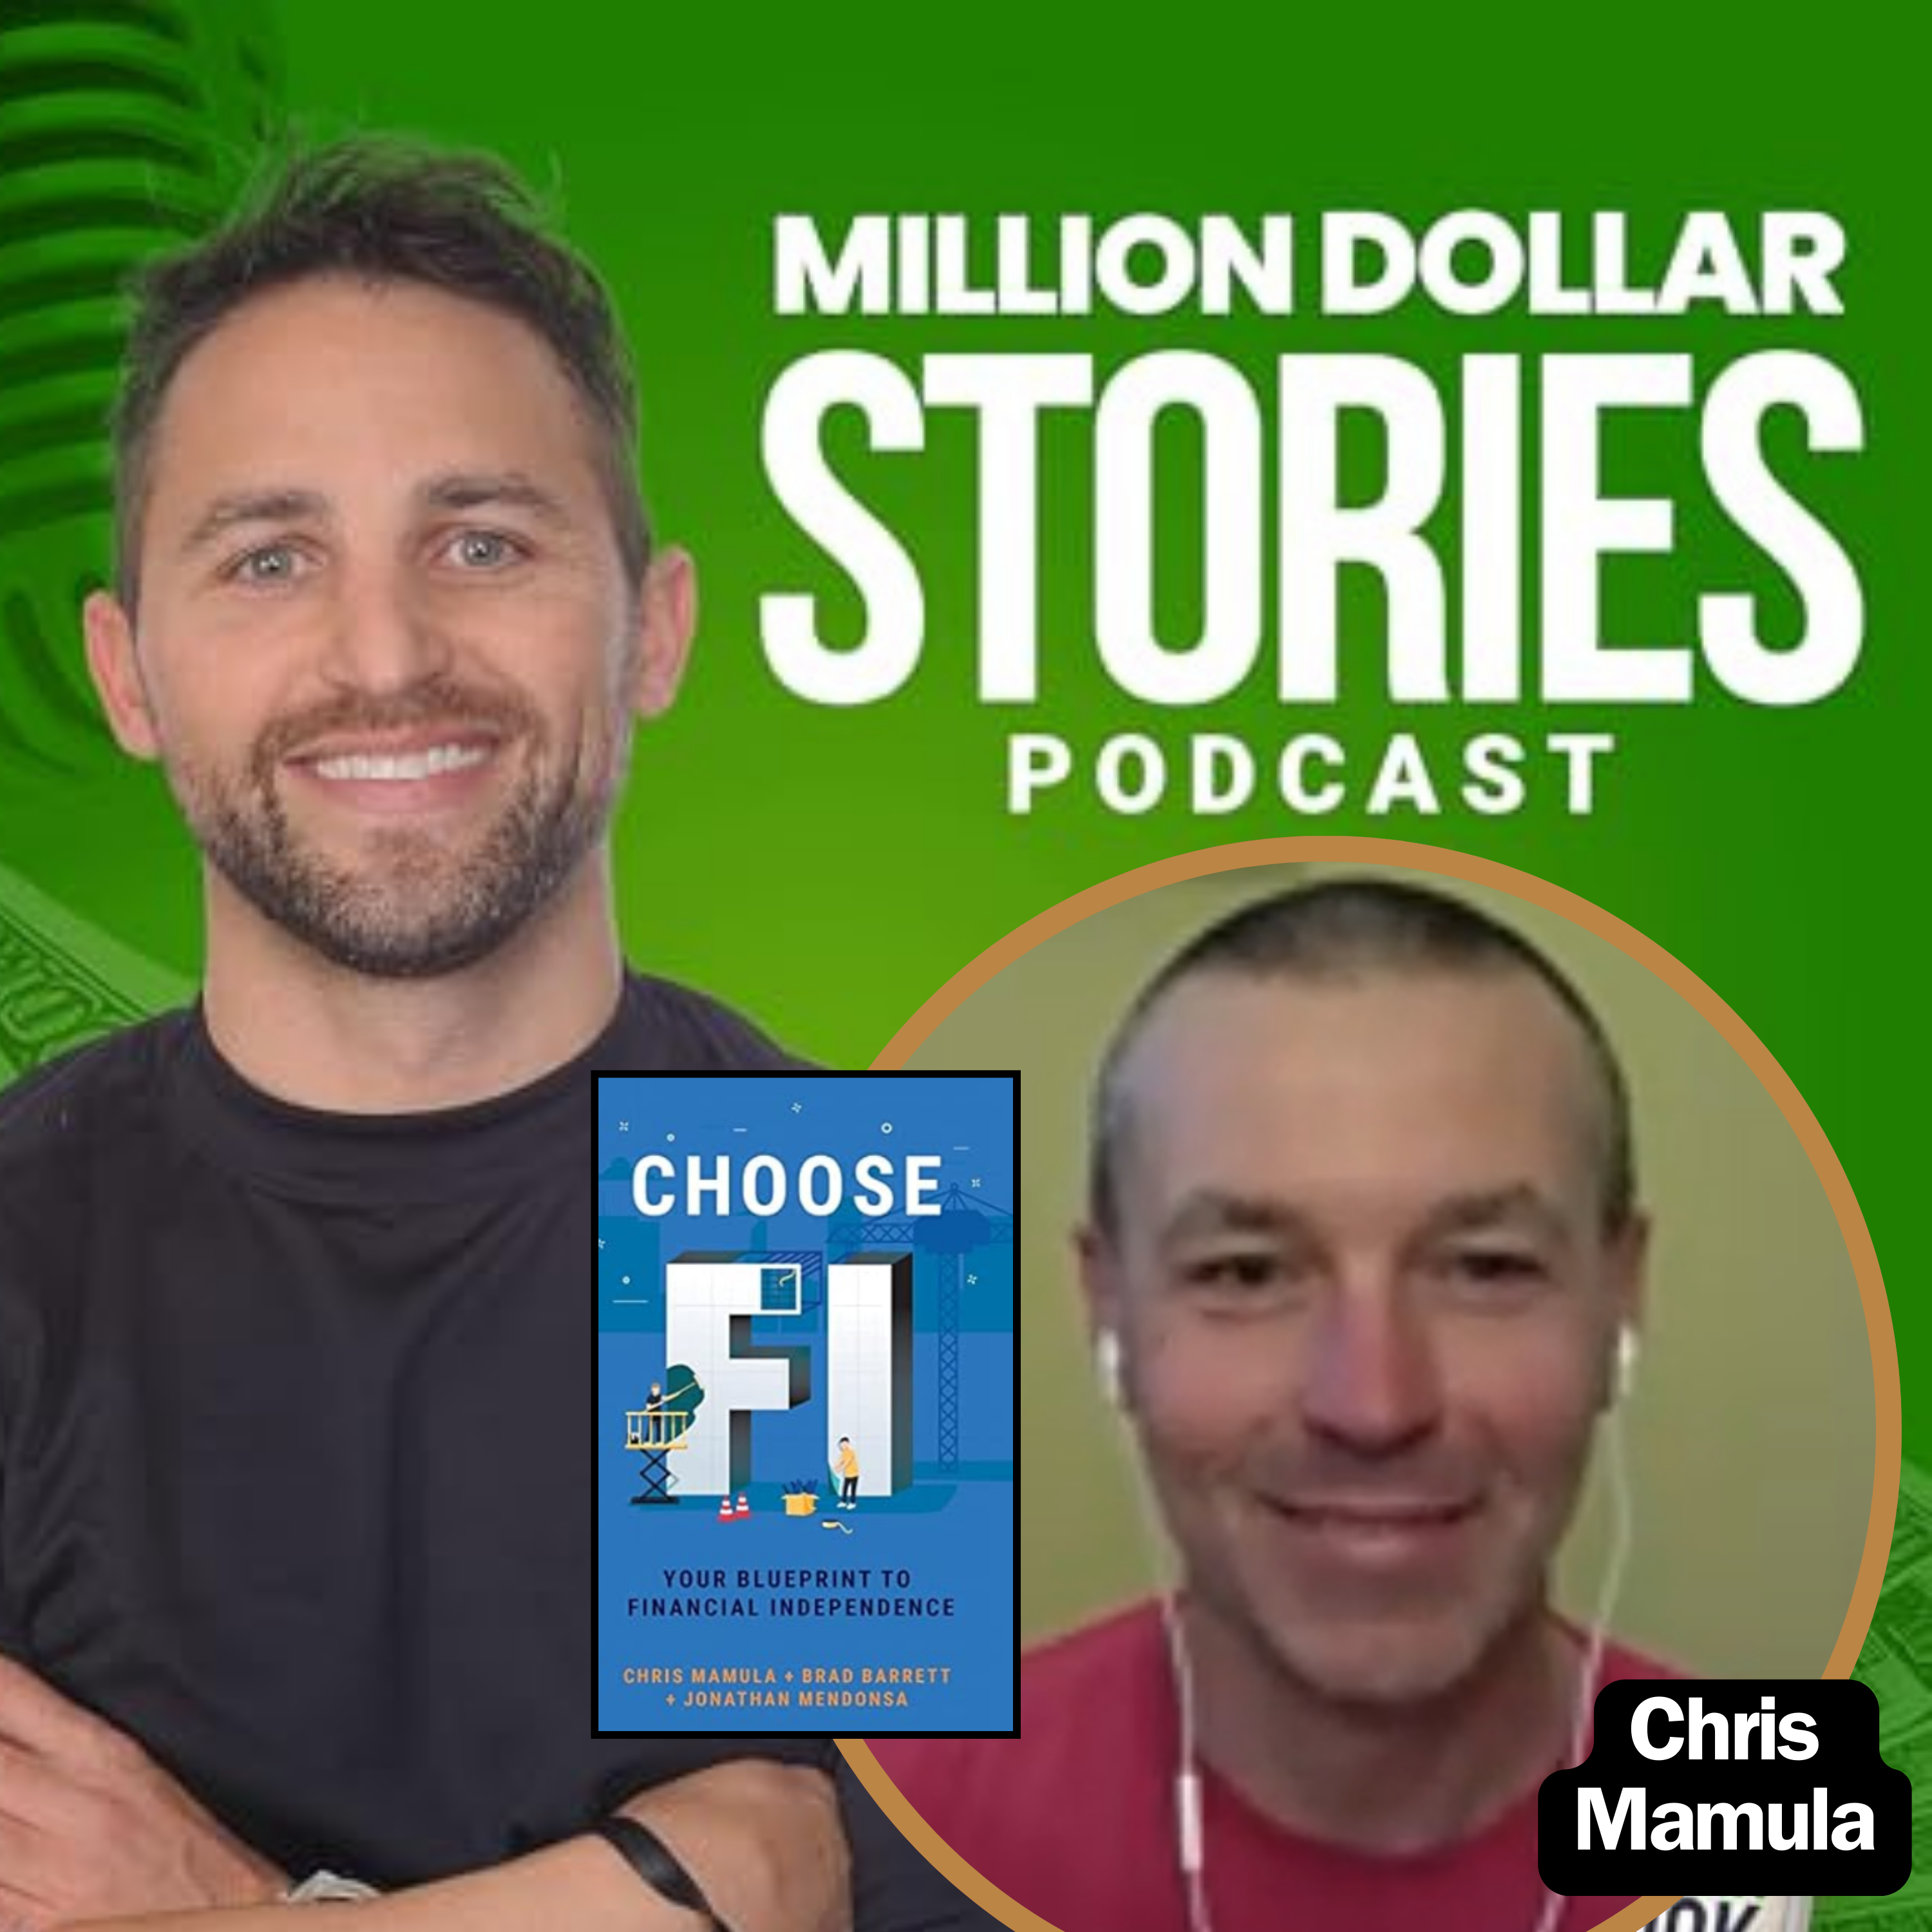 Chris Mamula – Author of “Choose FI: Your Blueprint to Financial Independence”